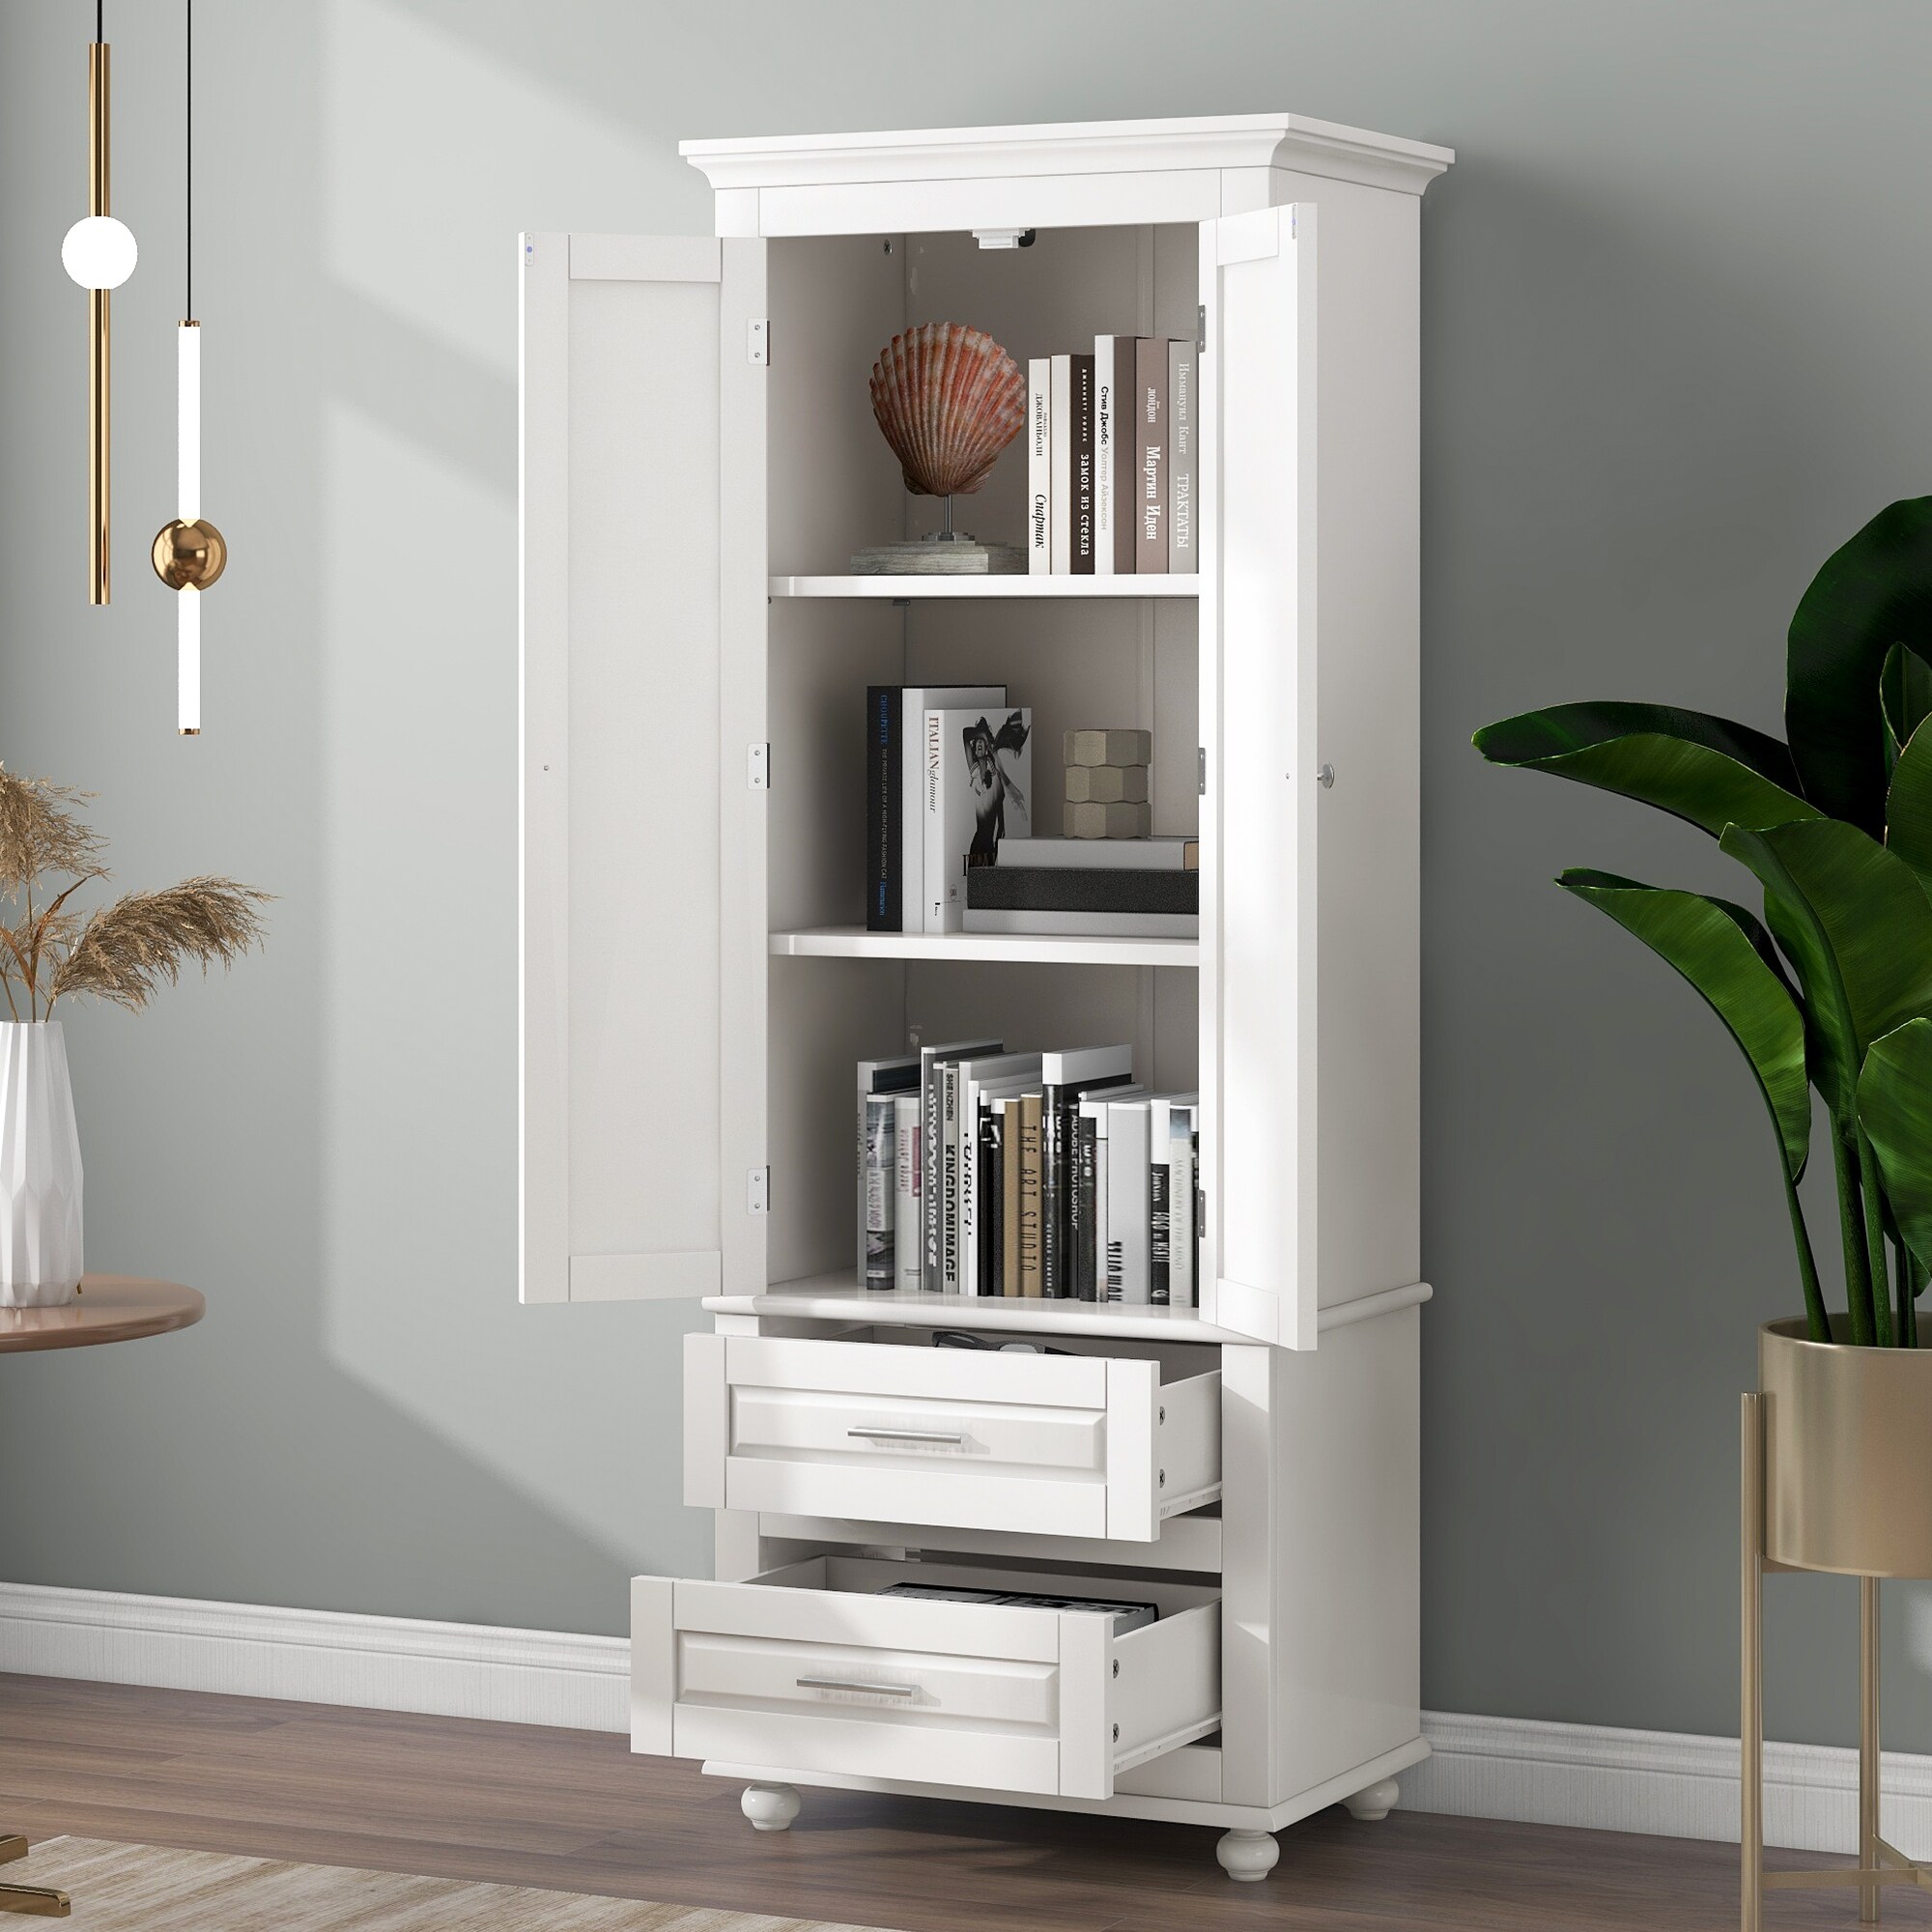 https://ak1.ostkcdn.com/images/products/is/images/direct/e8786b9b3cd185aa6eacfb6bc05dd2487f633f7a/White-Tall-Storage-Cabinet-with-Two-Drawers.jpg